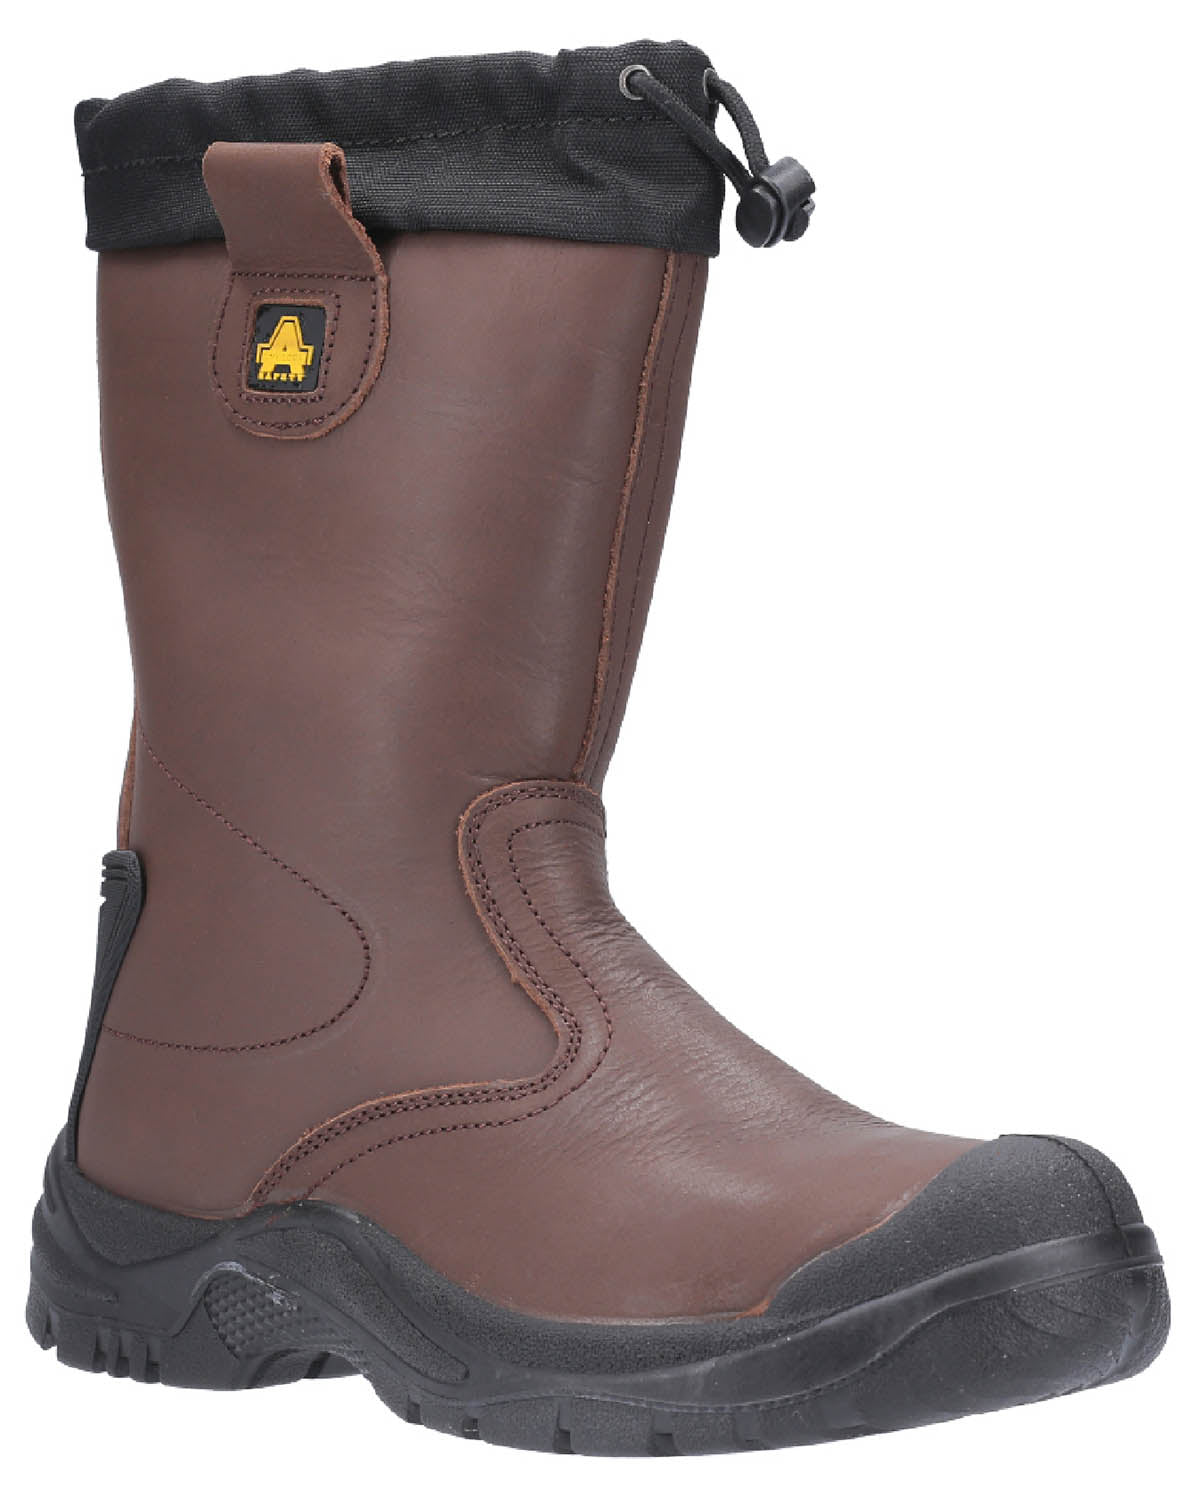 dunlop safety rigger safety boots mens